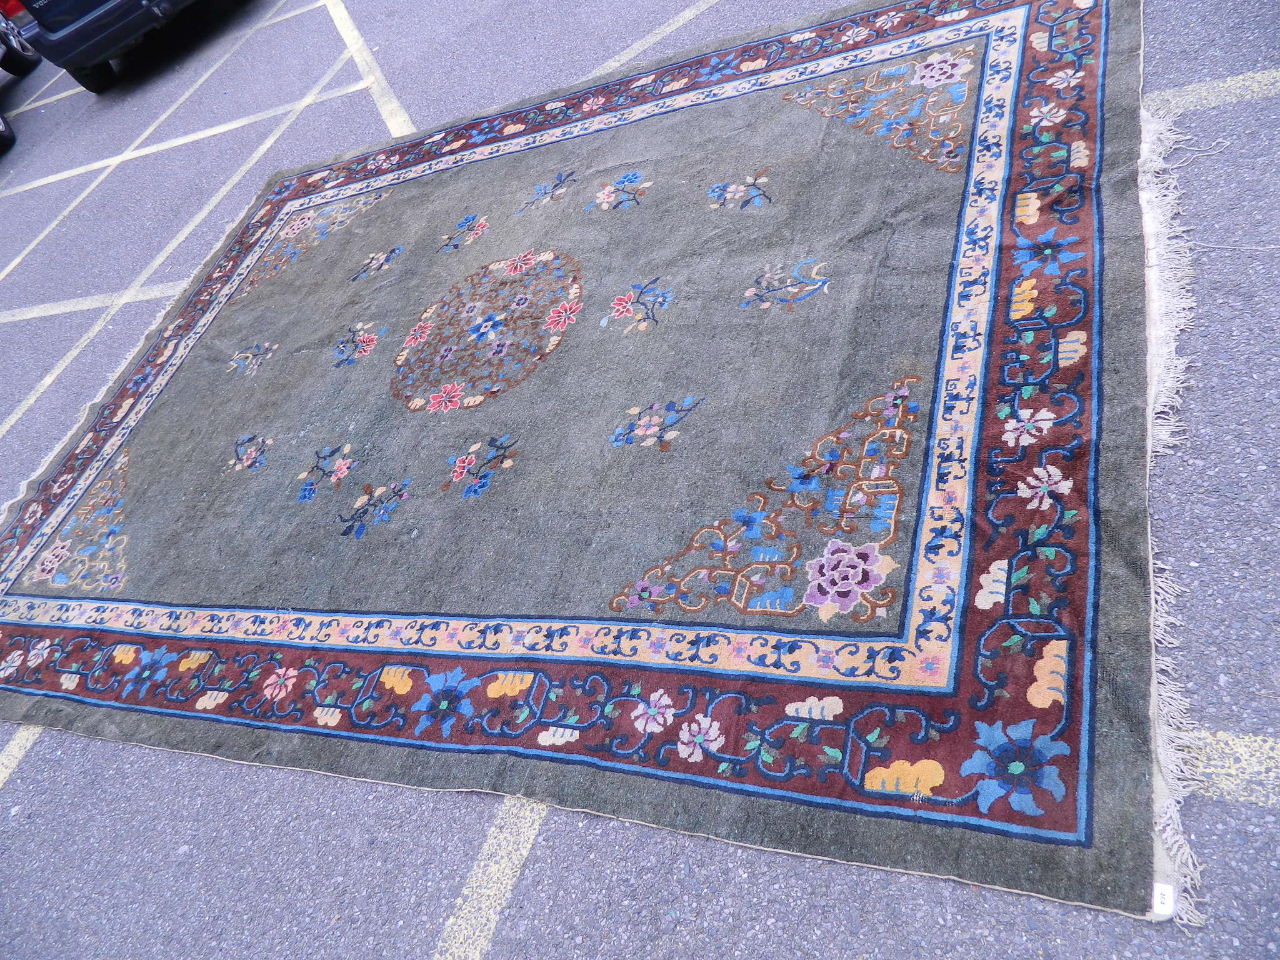 An antique Chinese carpet decorated with flowers on a jade green field, 144" x 109"